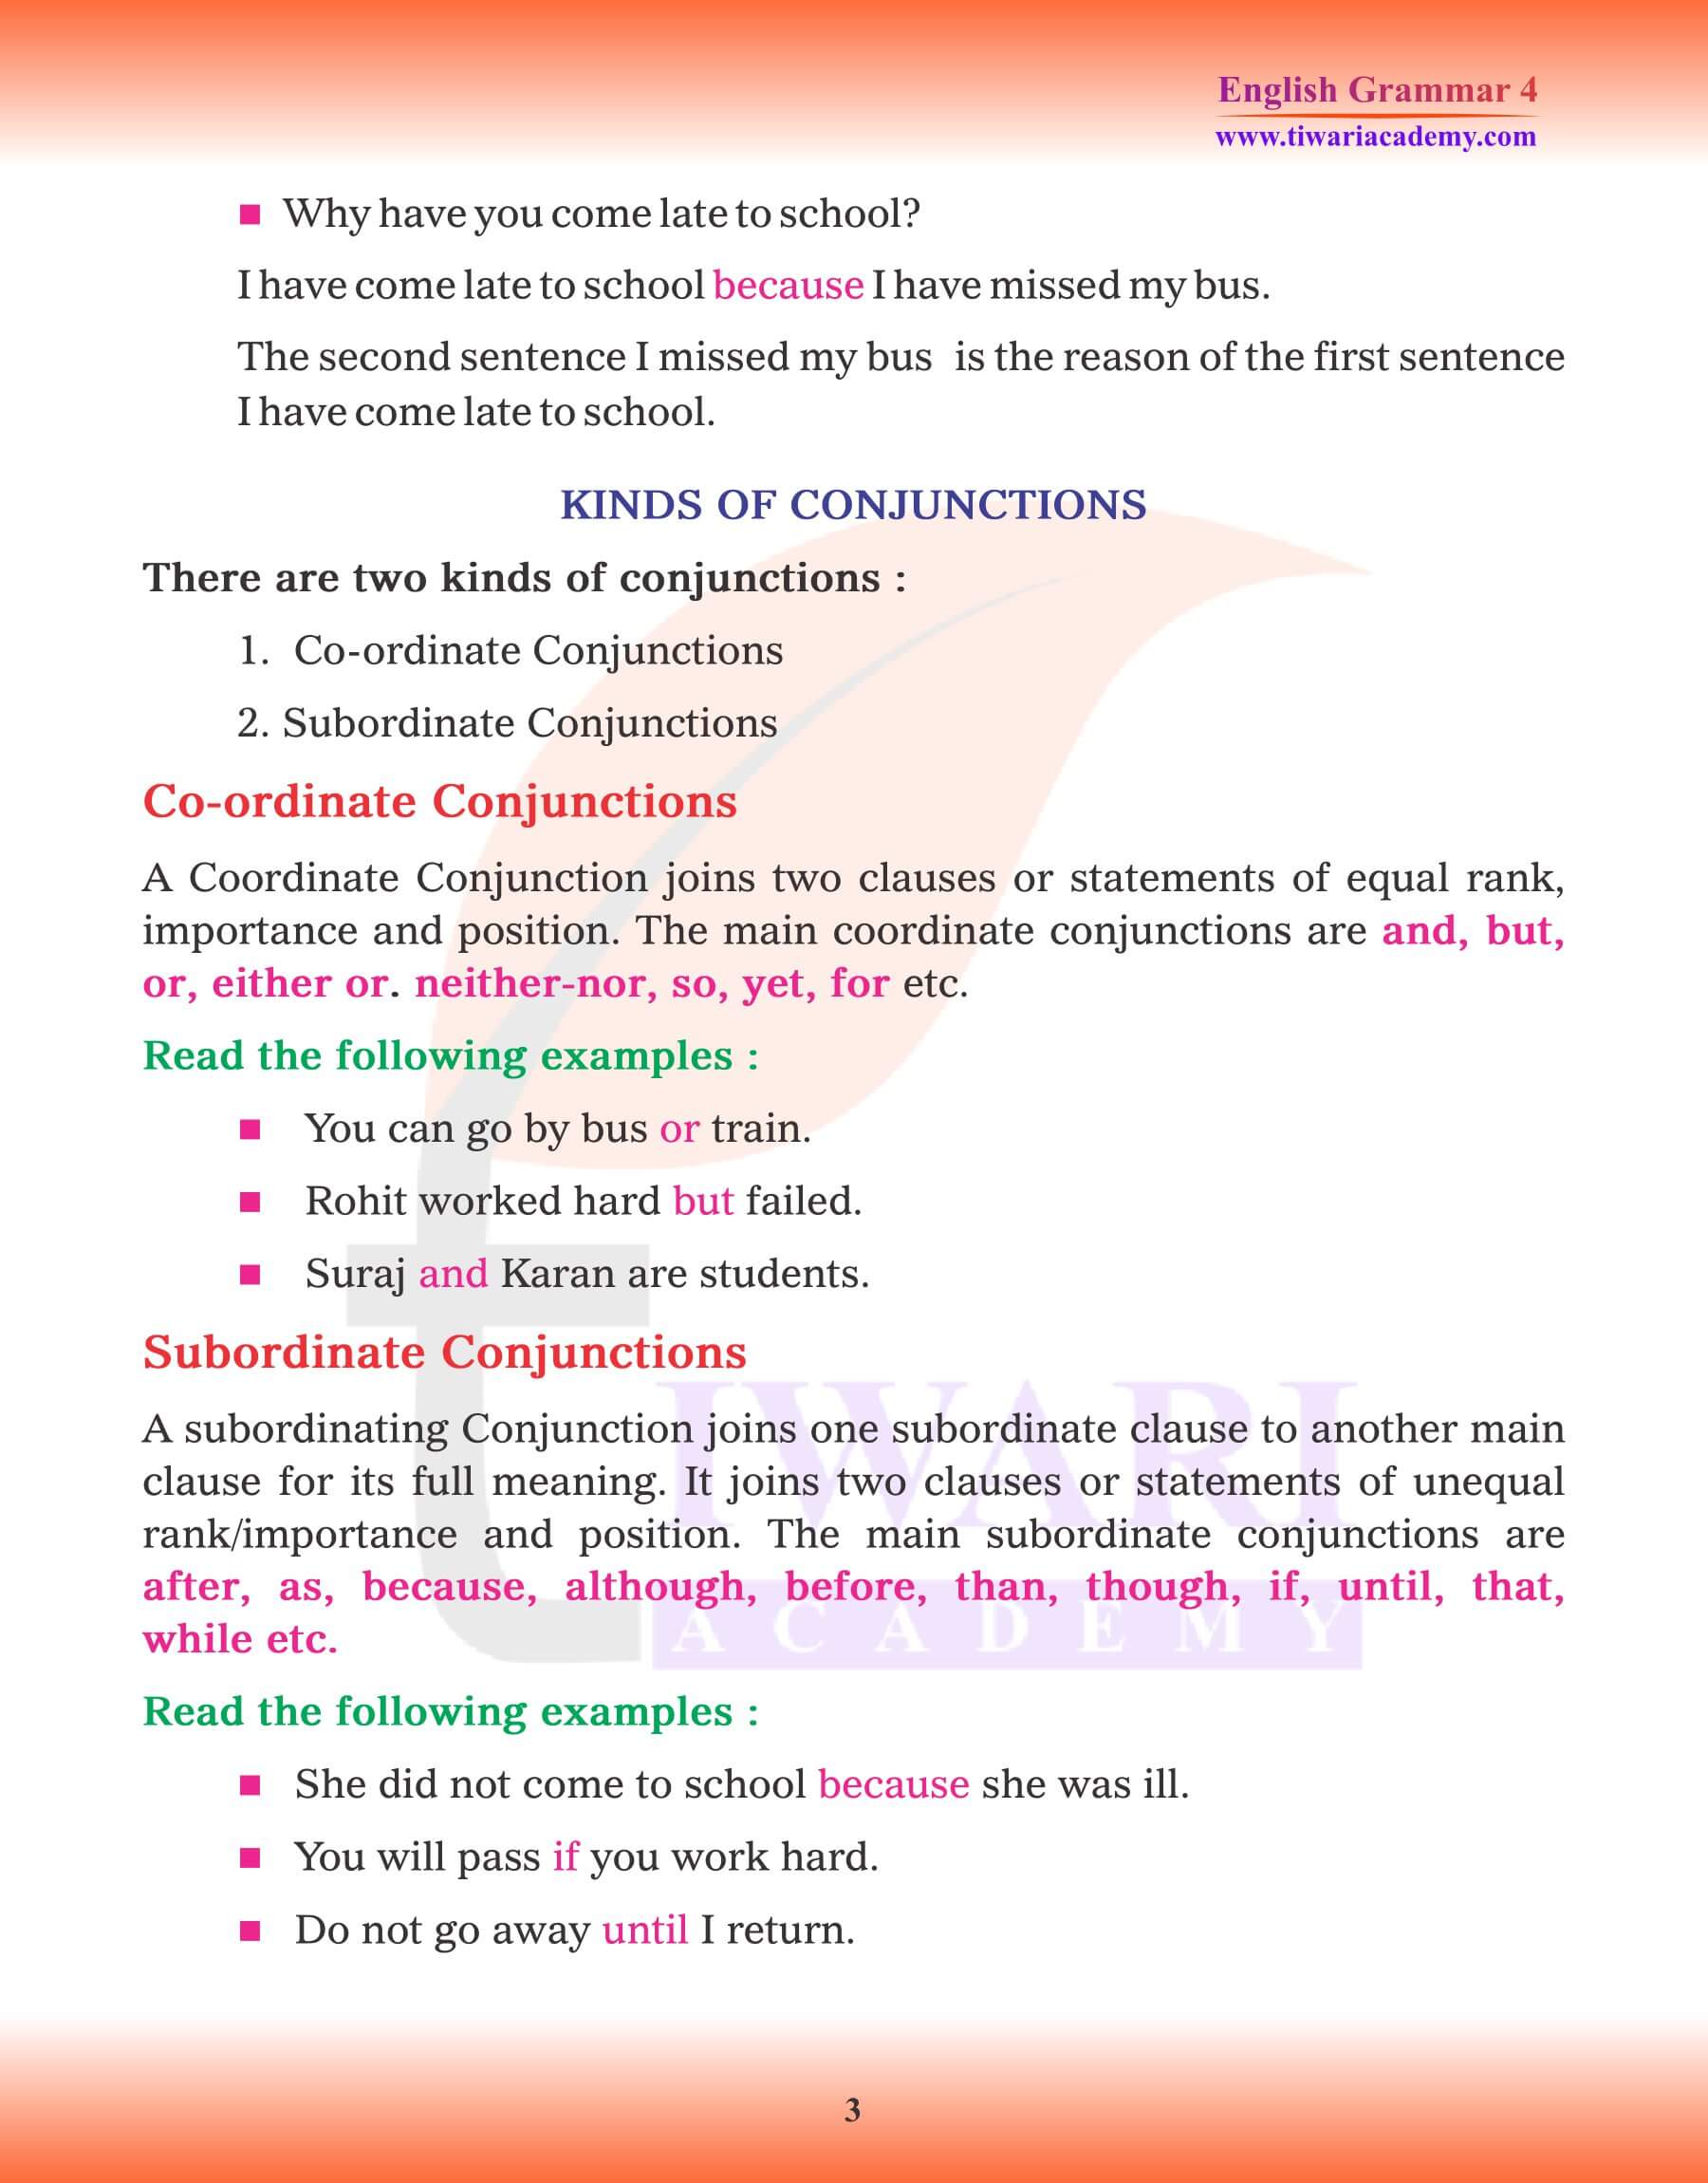 Class 4 English Grammar Kinds of Conjunctions